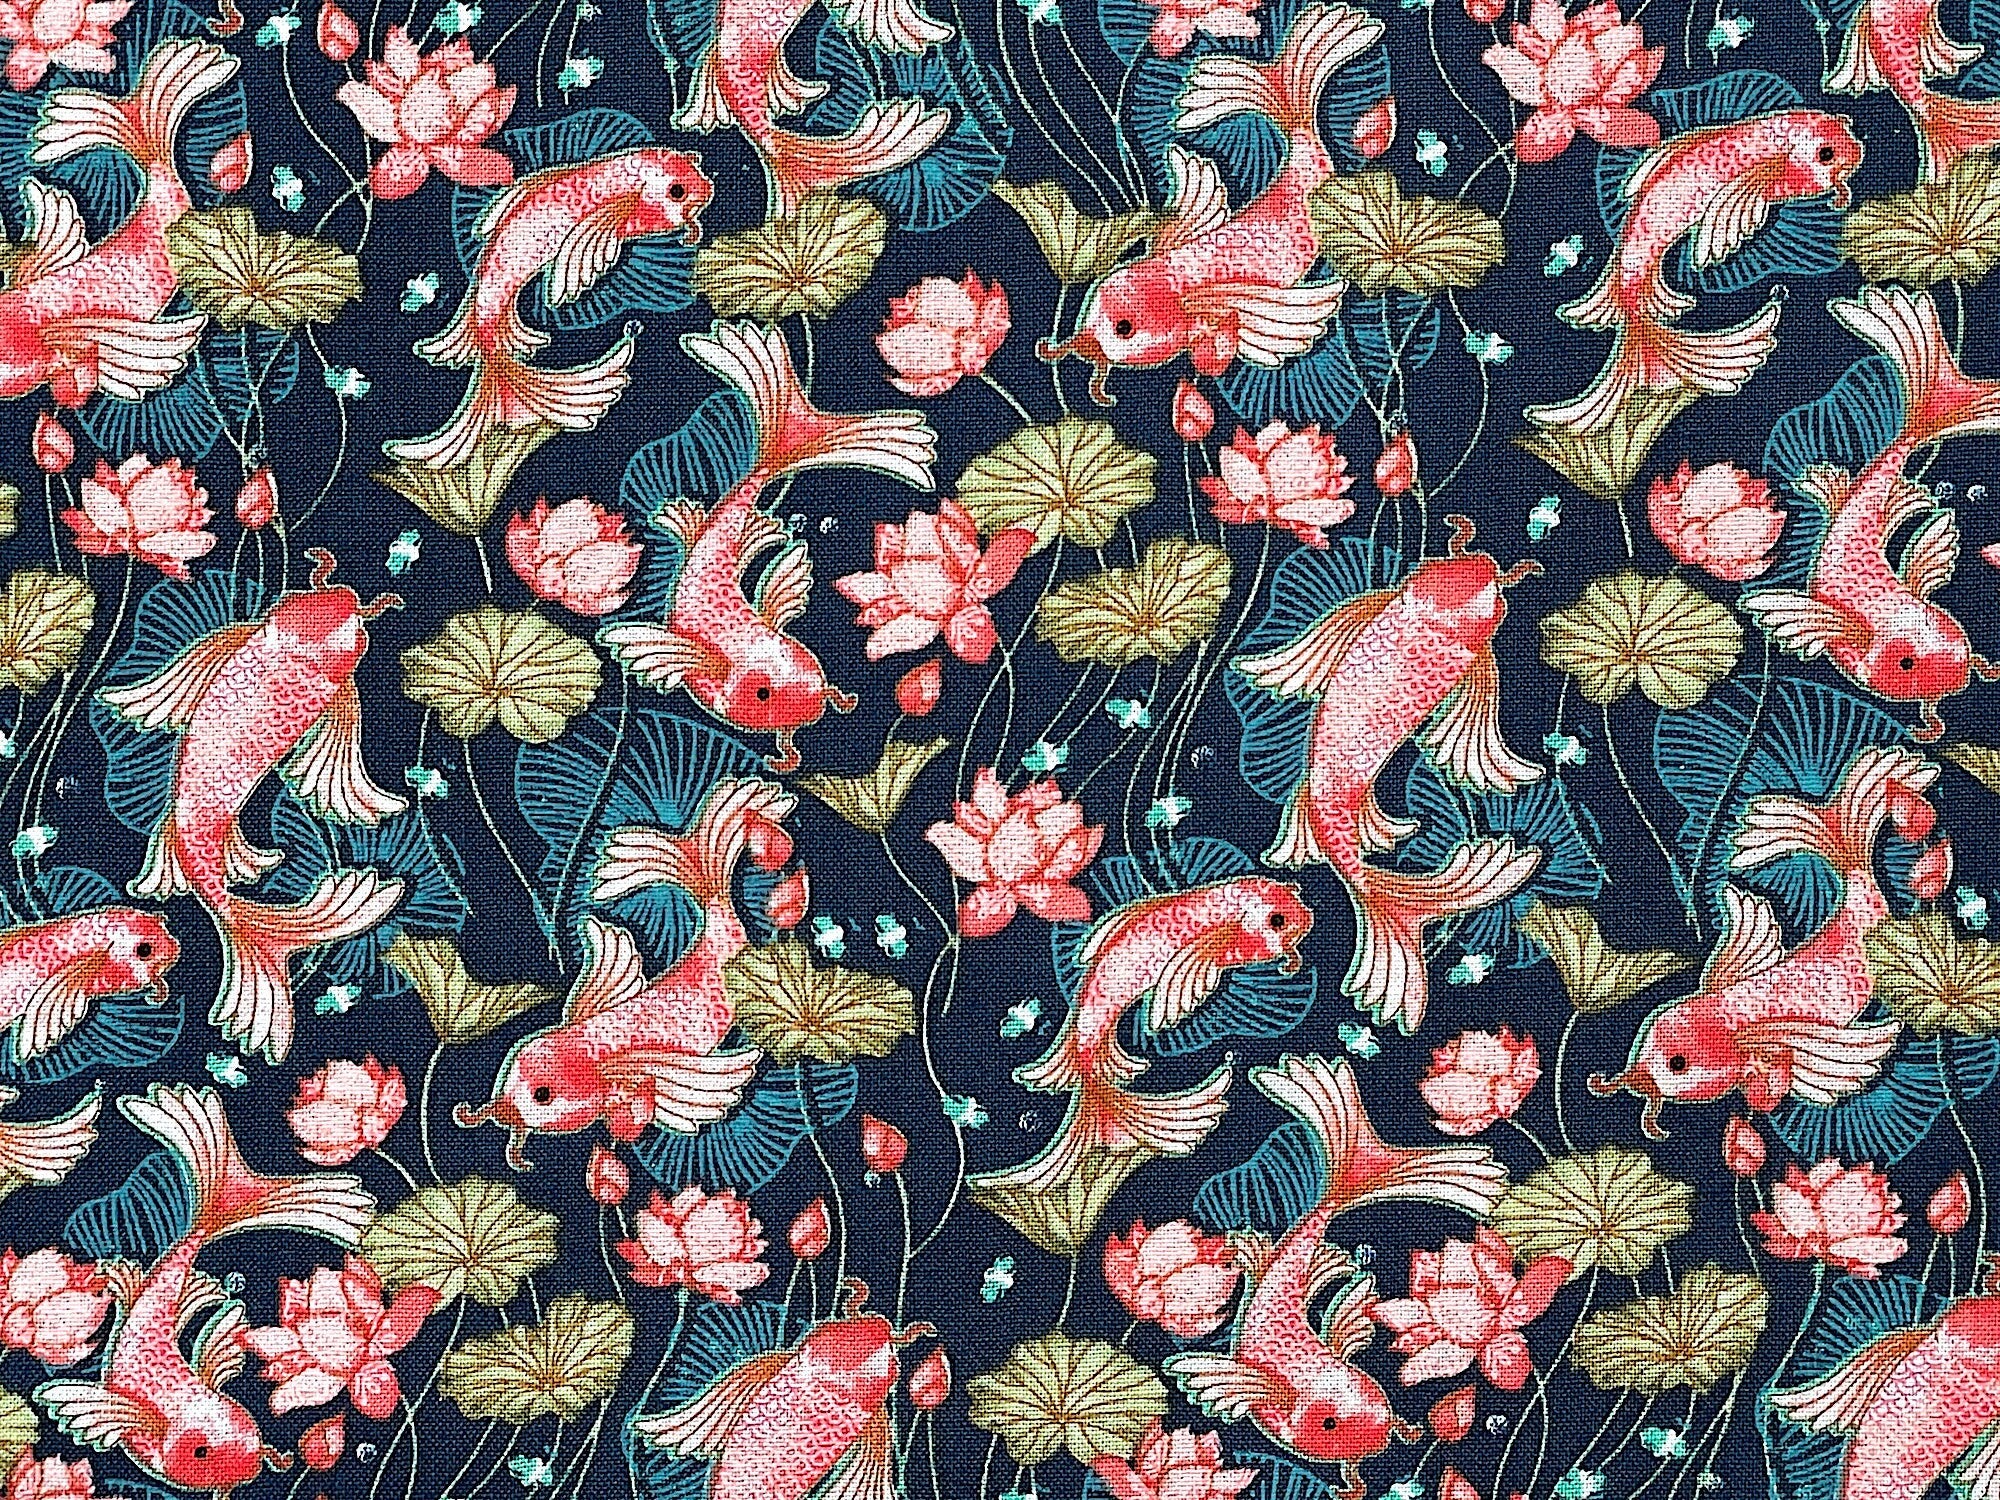 This fabric is part of the Koi Garden collection by Nancy Archer. This dark teal cotton fabric is covered with small orange koi and water lilies